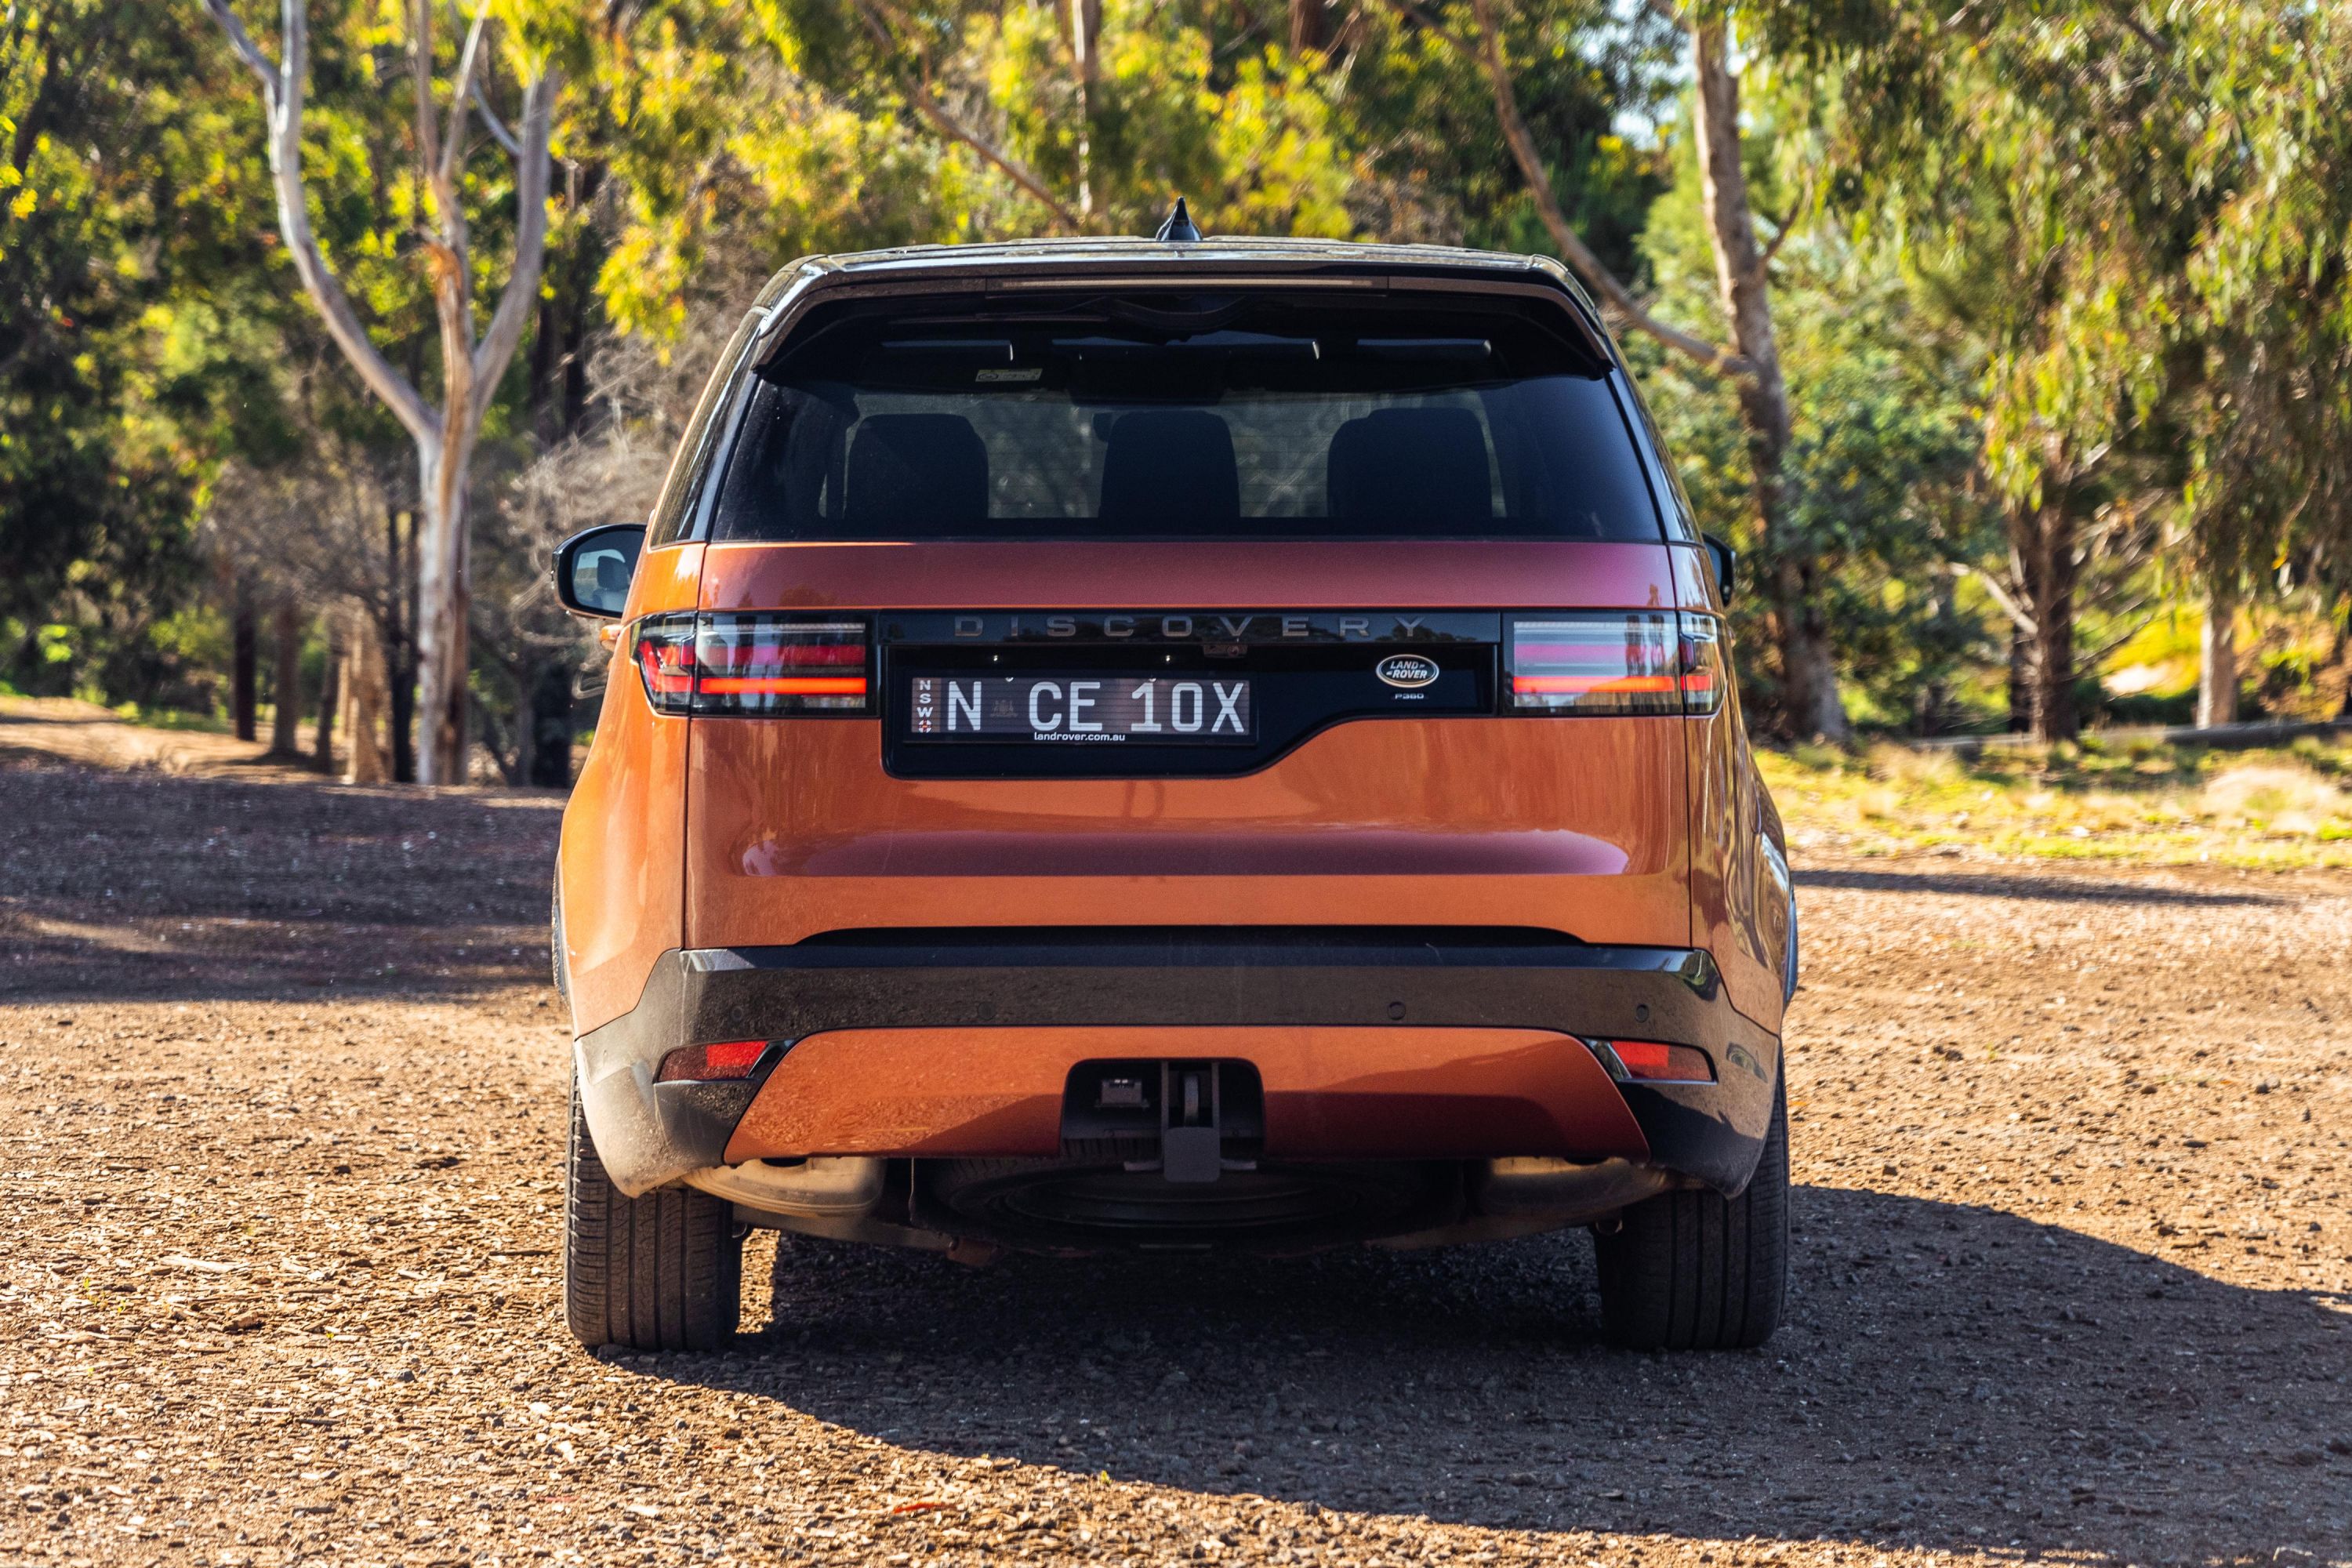 2022 Land Rover Discovery review | CarExpert